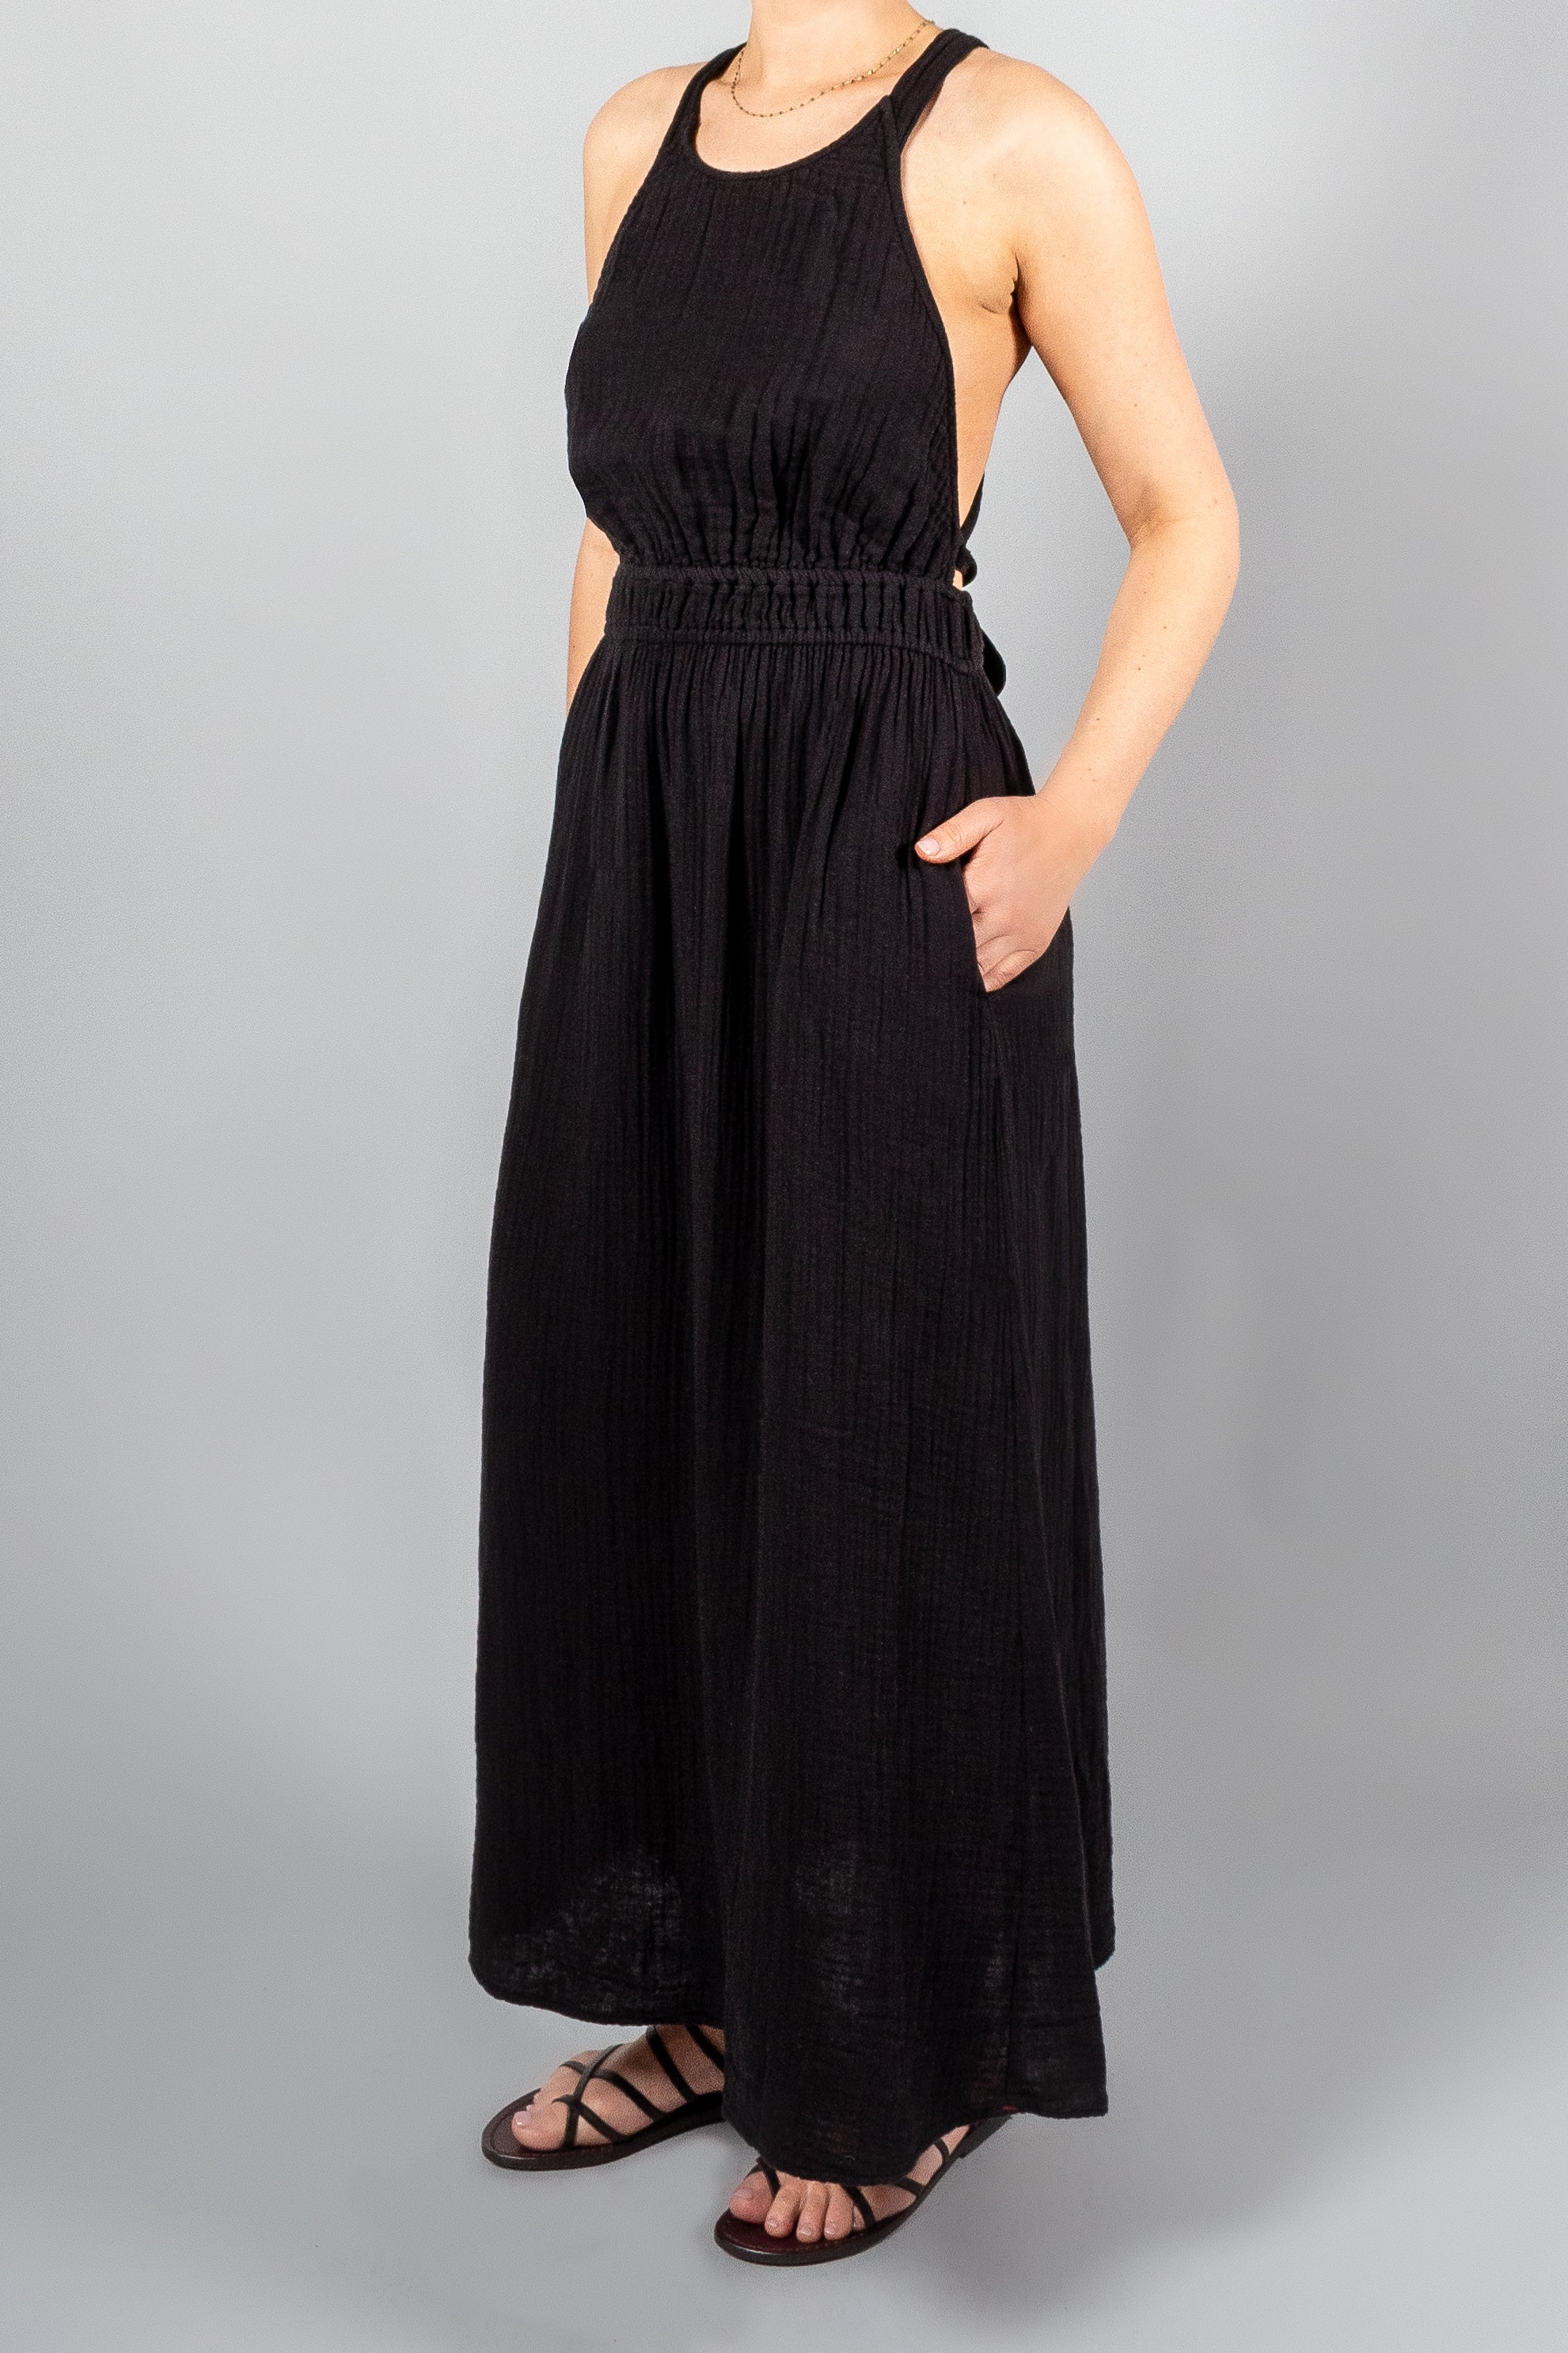 Xirena Sienna Dress-Dresses and Jumpsuits-Misch-Boutique-Vancouver-Canada-misch.ca